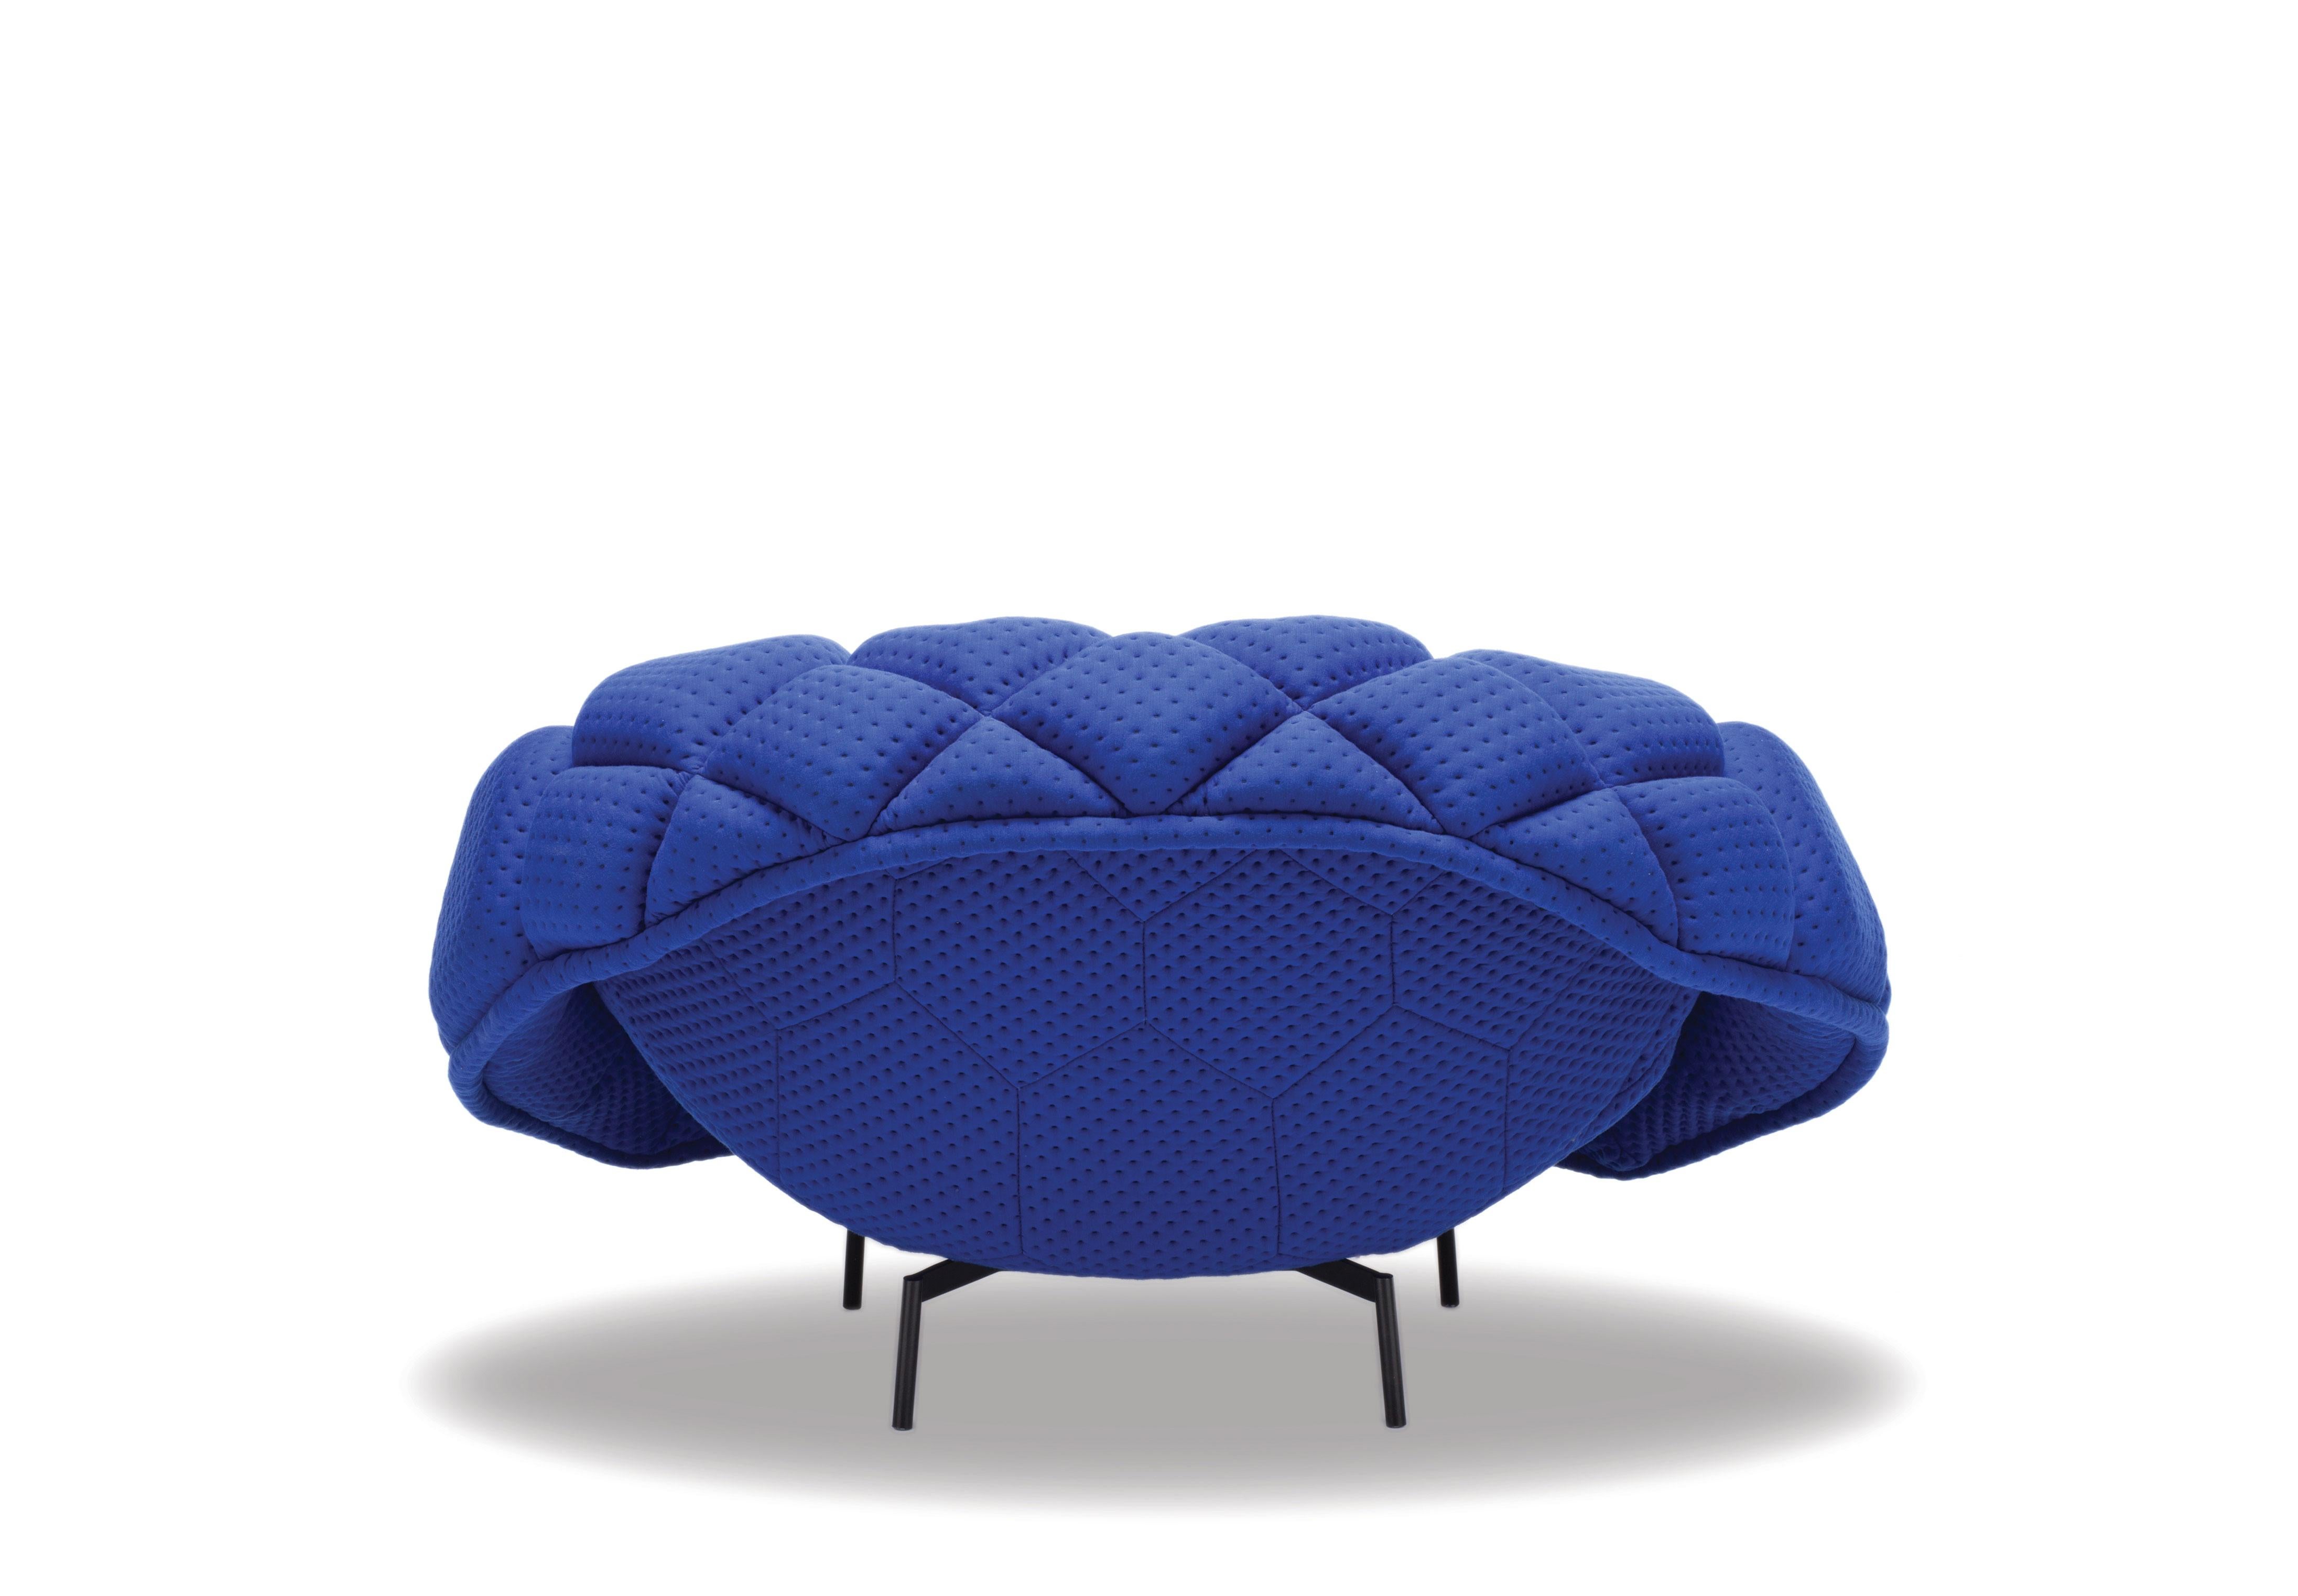 Contemporary Ronan & Erwan Bouroullec Quilt Armchair for Established & Sons For Sale